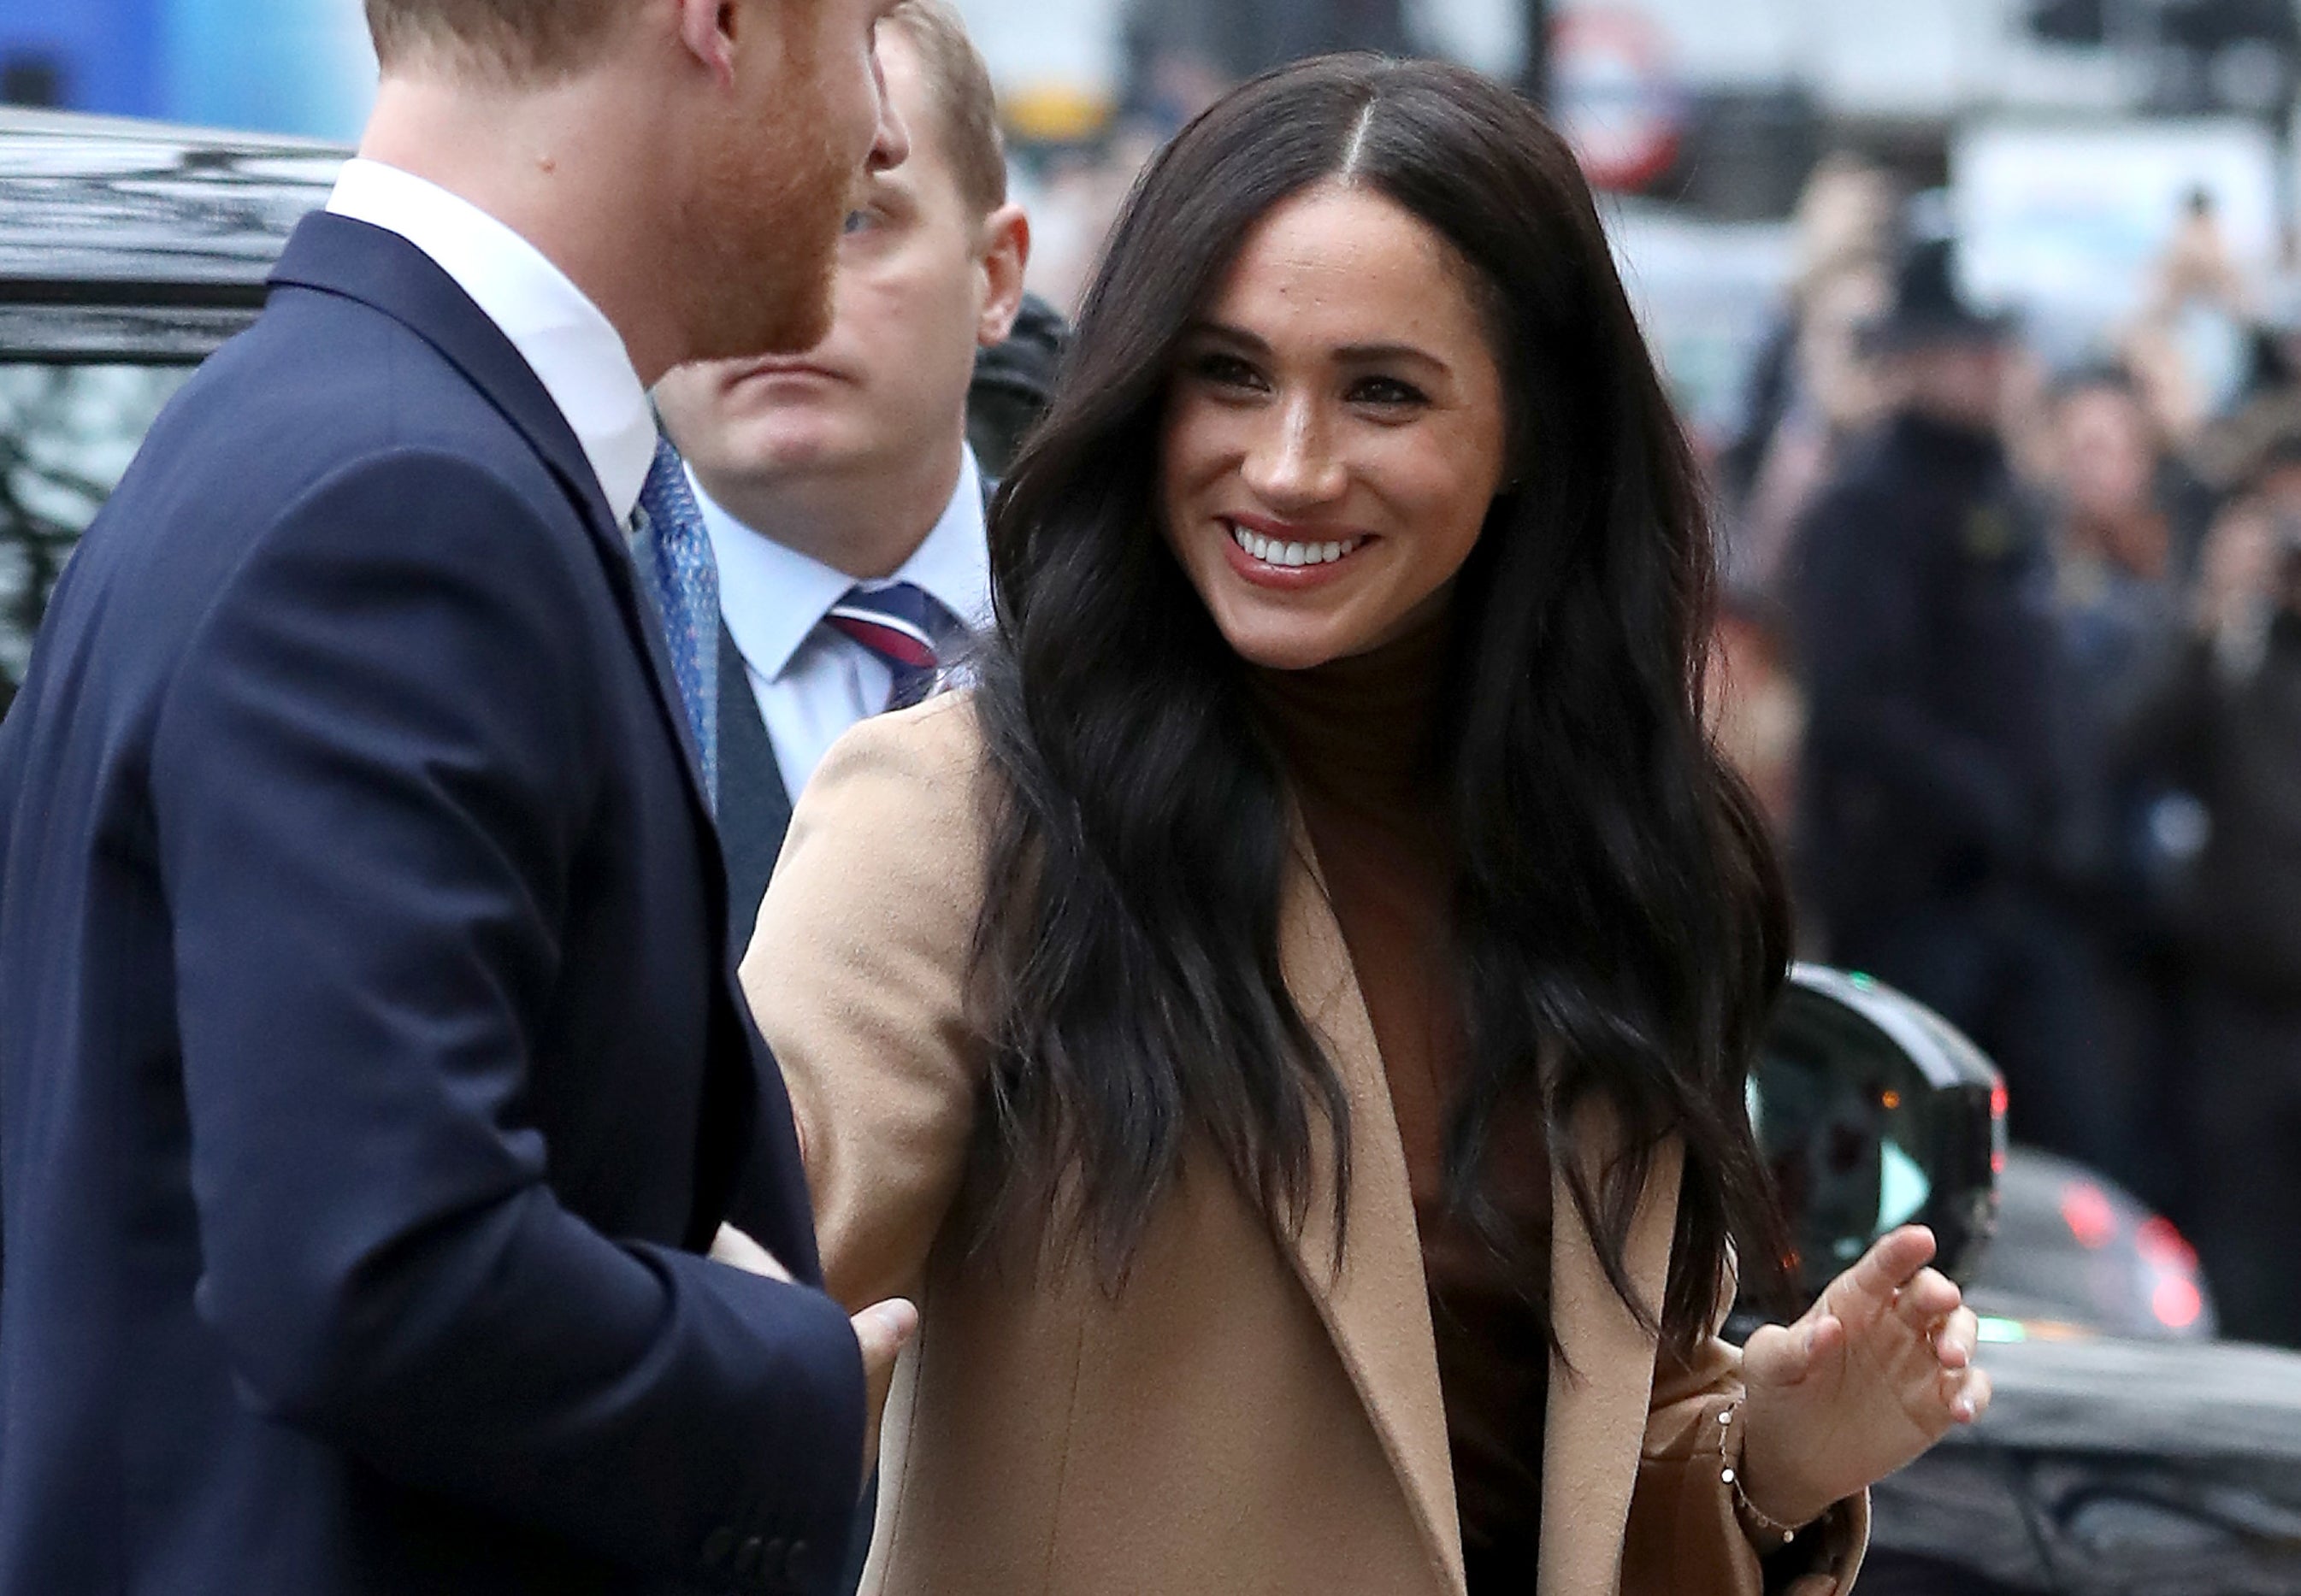 Meghan smiles on her way to an event